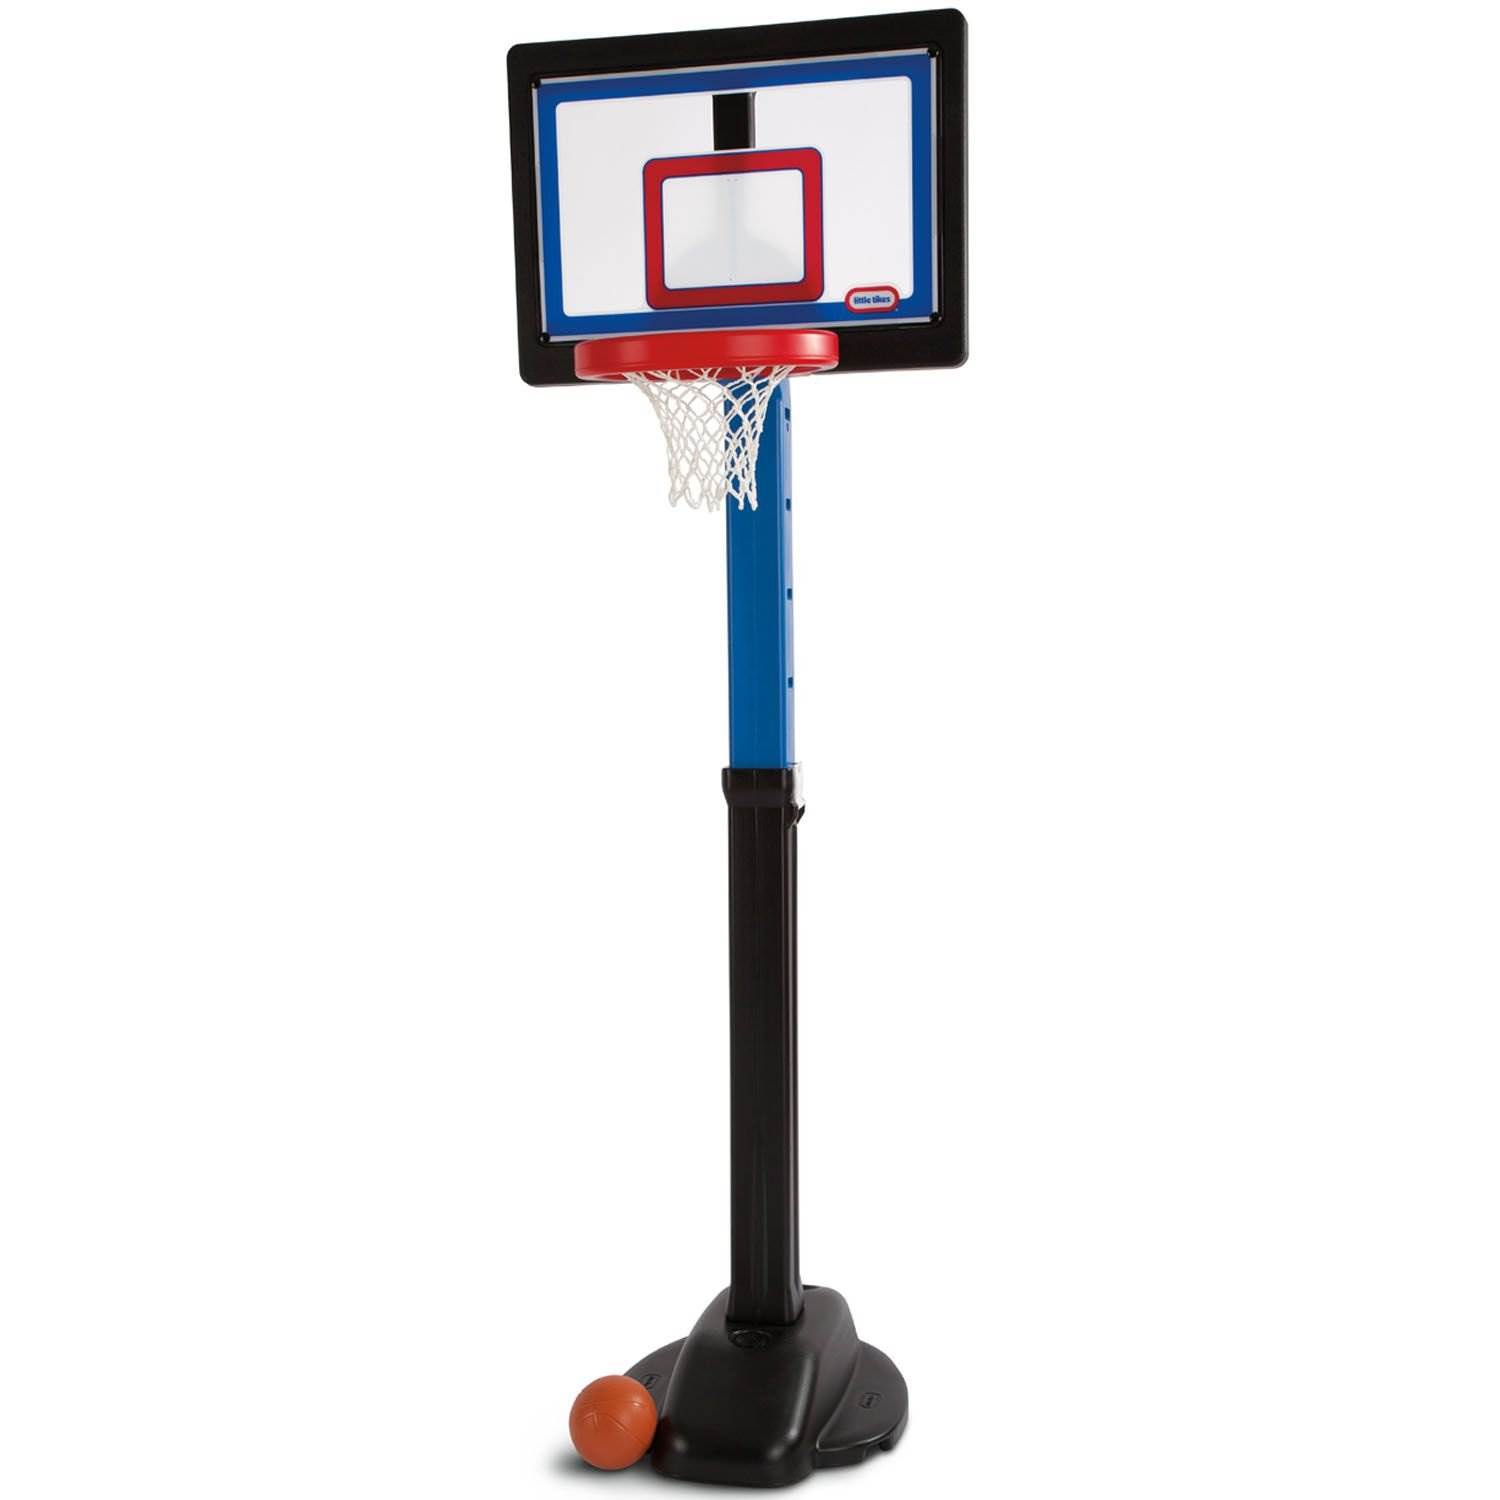 Little Tikes Play Pro Indoor Outdoor Kids Play Toy Portable Basketball Hoop Set - image 1 of 4